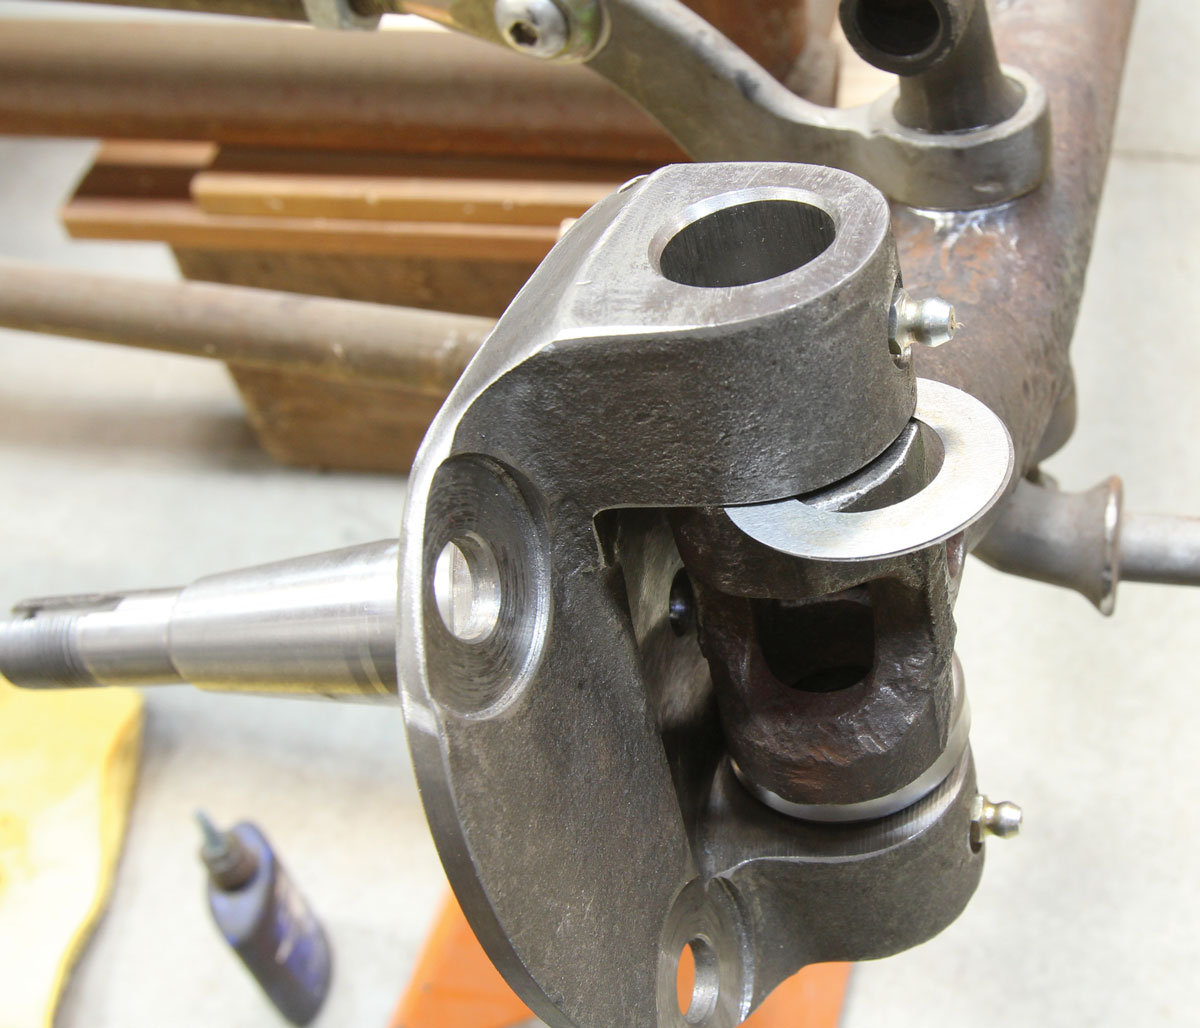 axle requiring two shims on the passenger side